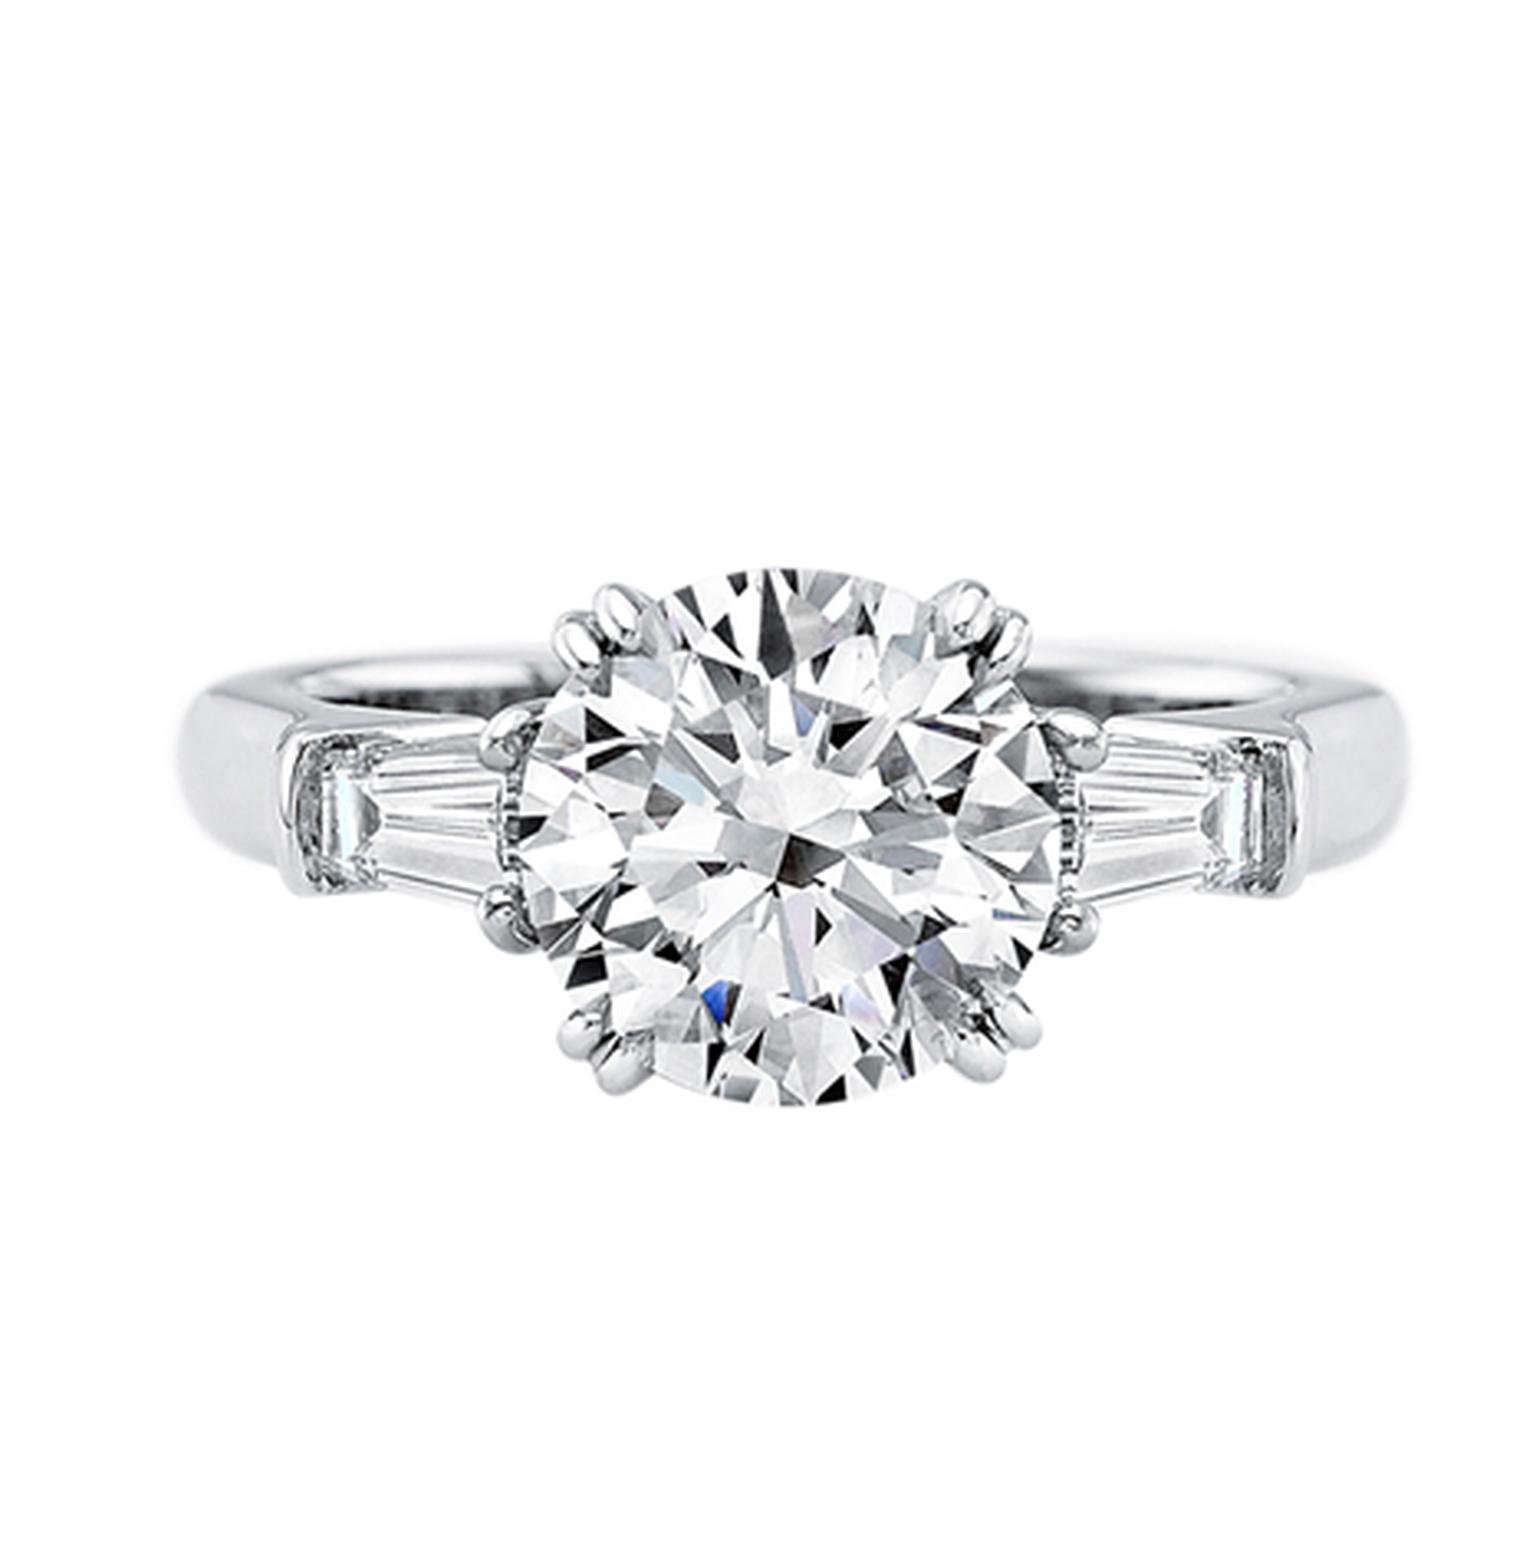 Harry Winston Classic Winston platinum diamond engagement ring featuring a 2.11ct round brilliant-cut diamond with tapered baguette side stones.